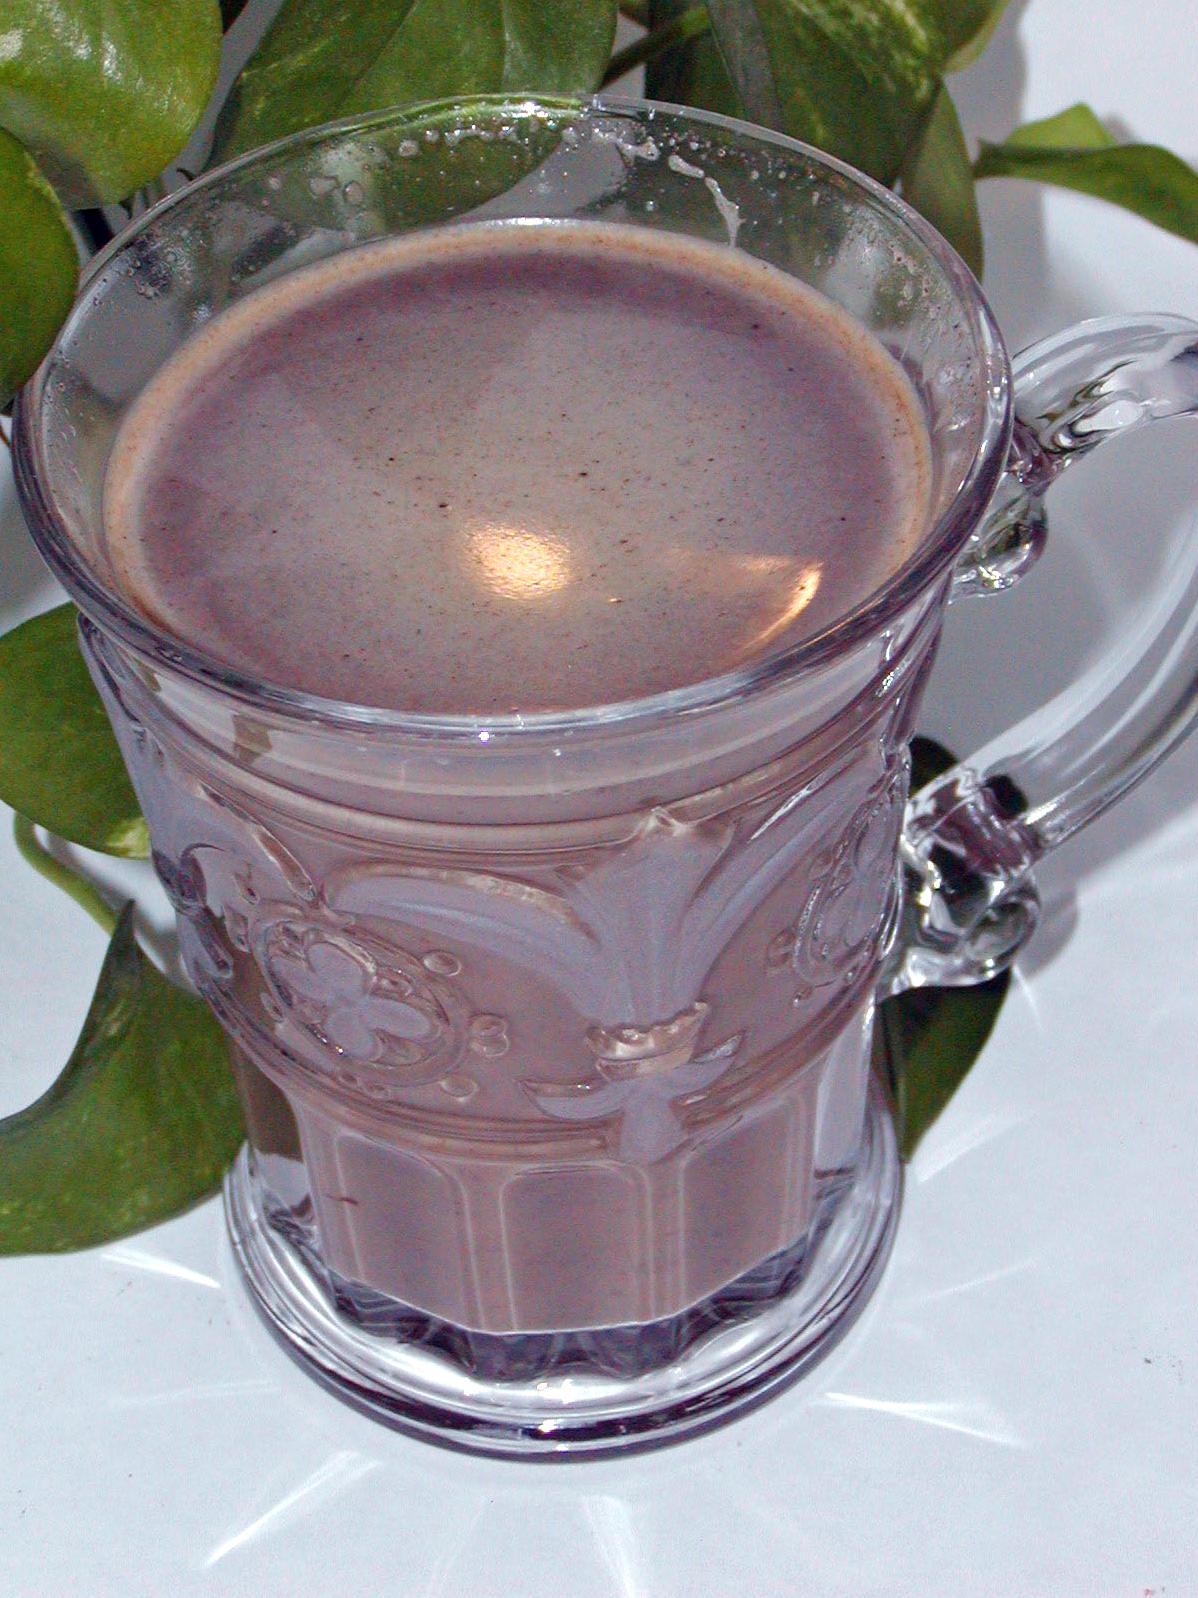  Don't settle for ordinary hot chocolate - try this Brazilian twist!